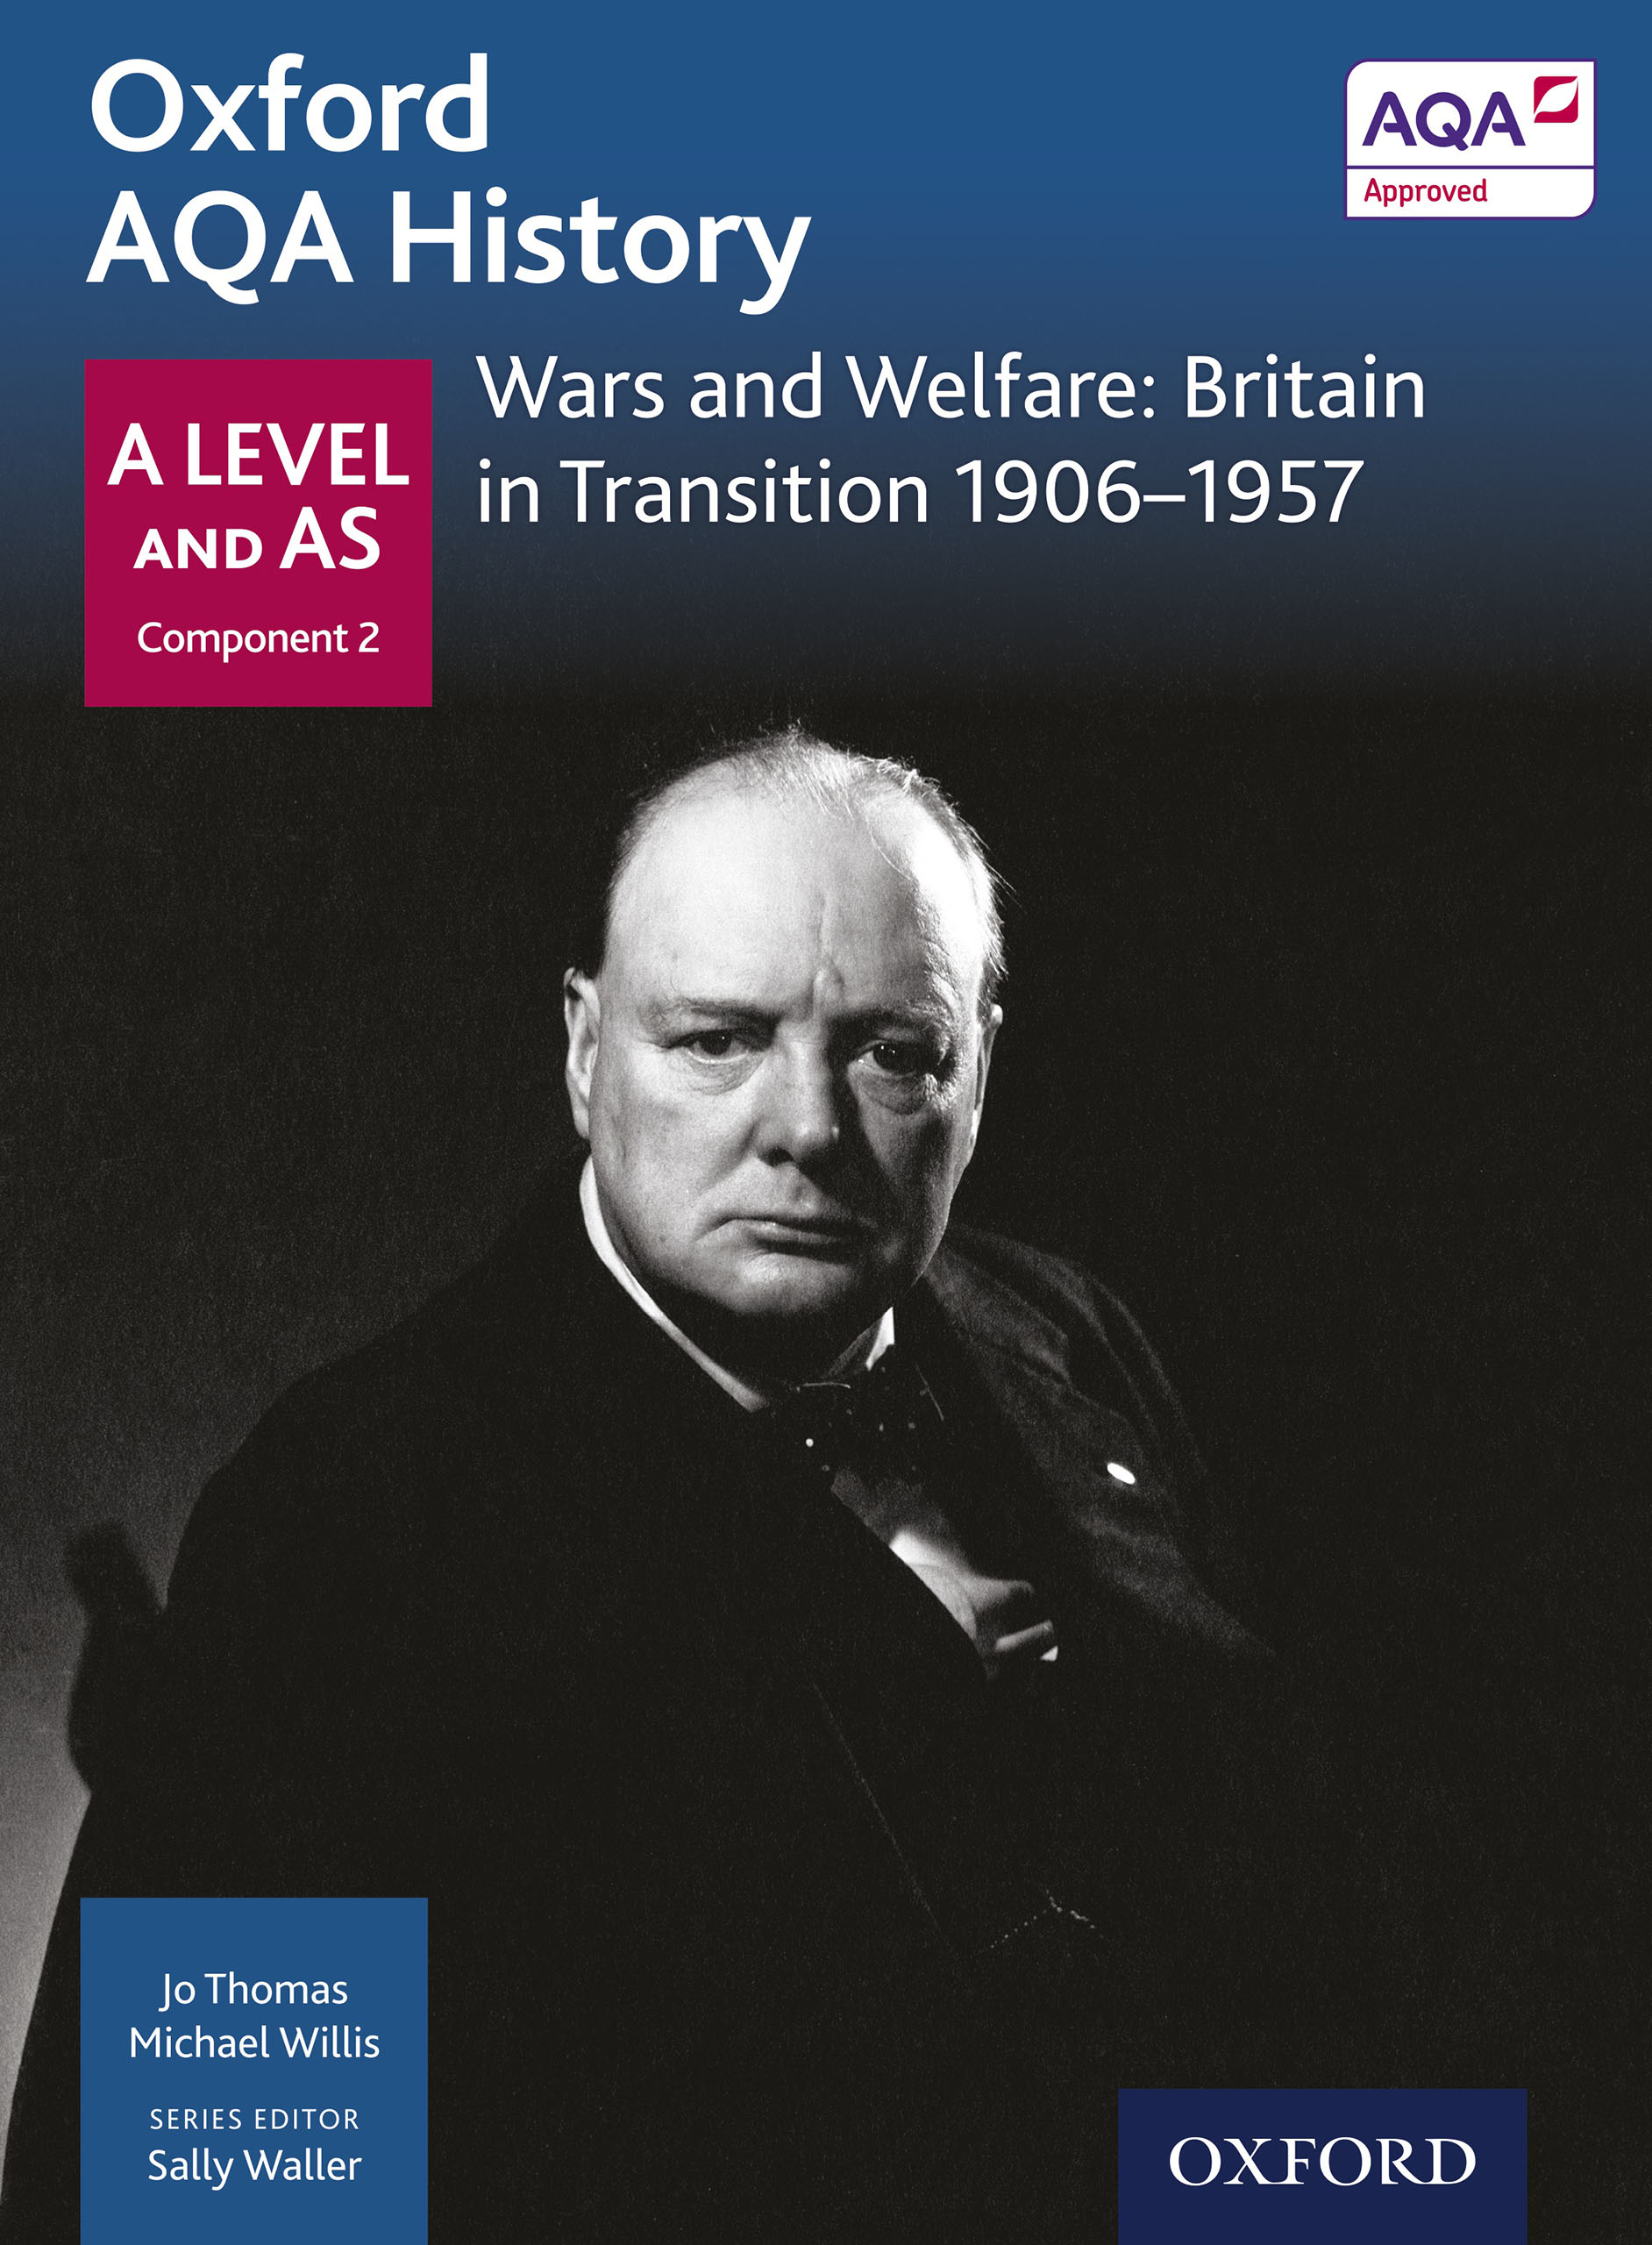 Oxford AQA History: A Level and AS Component 2: Wars and Welfare: Britain in Transition 1906-1956